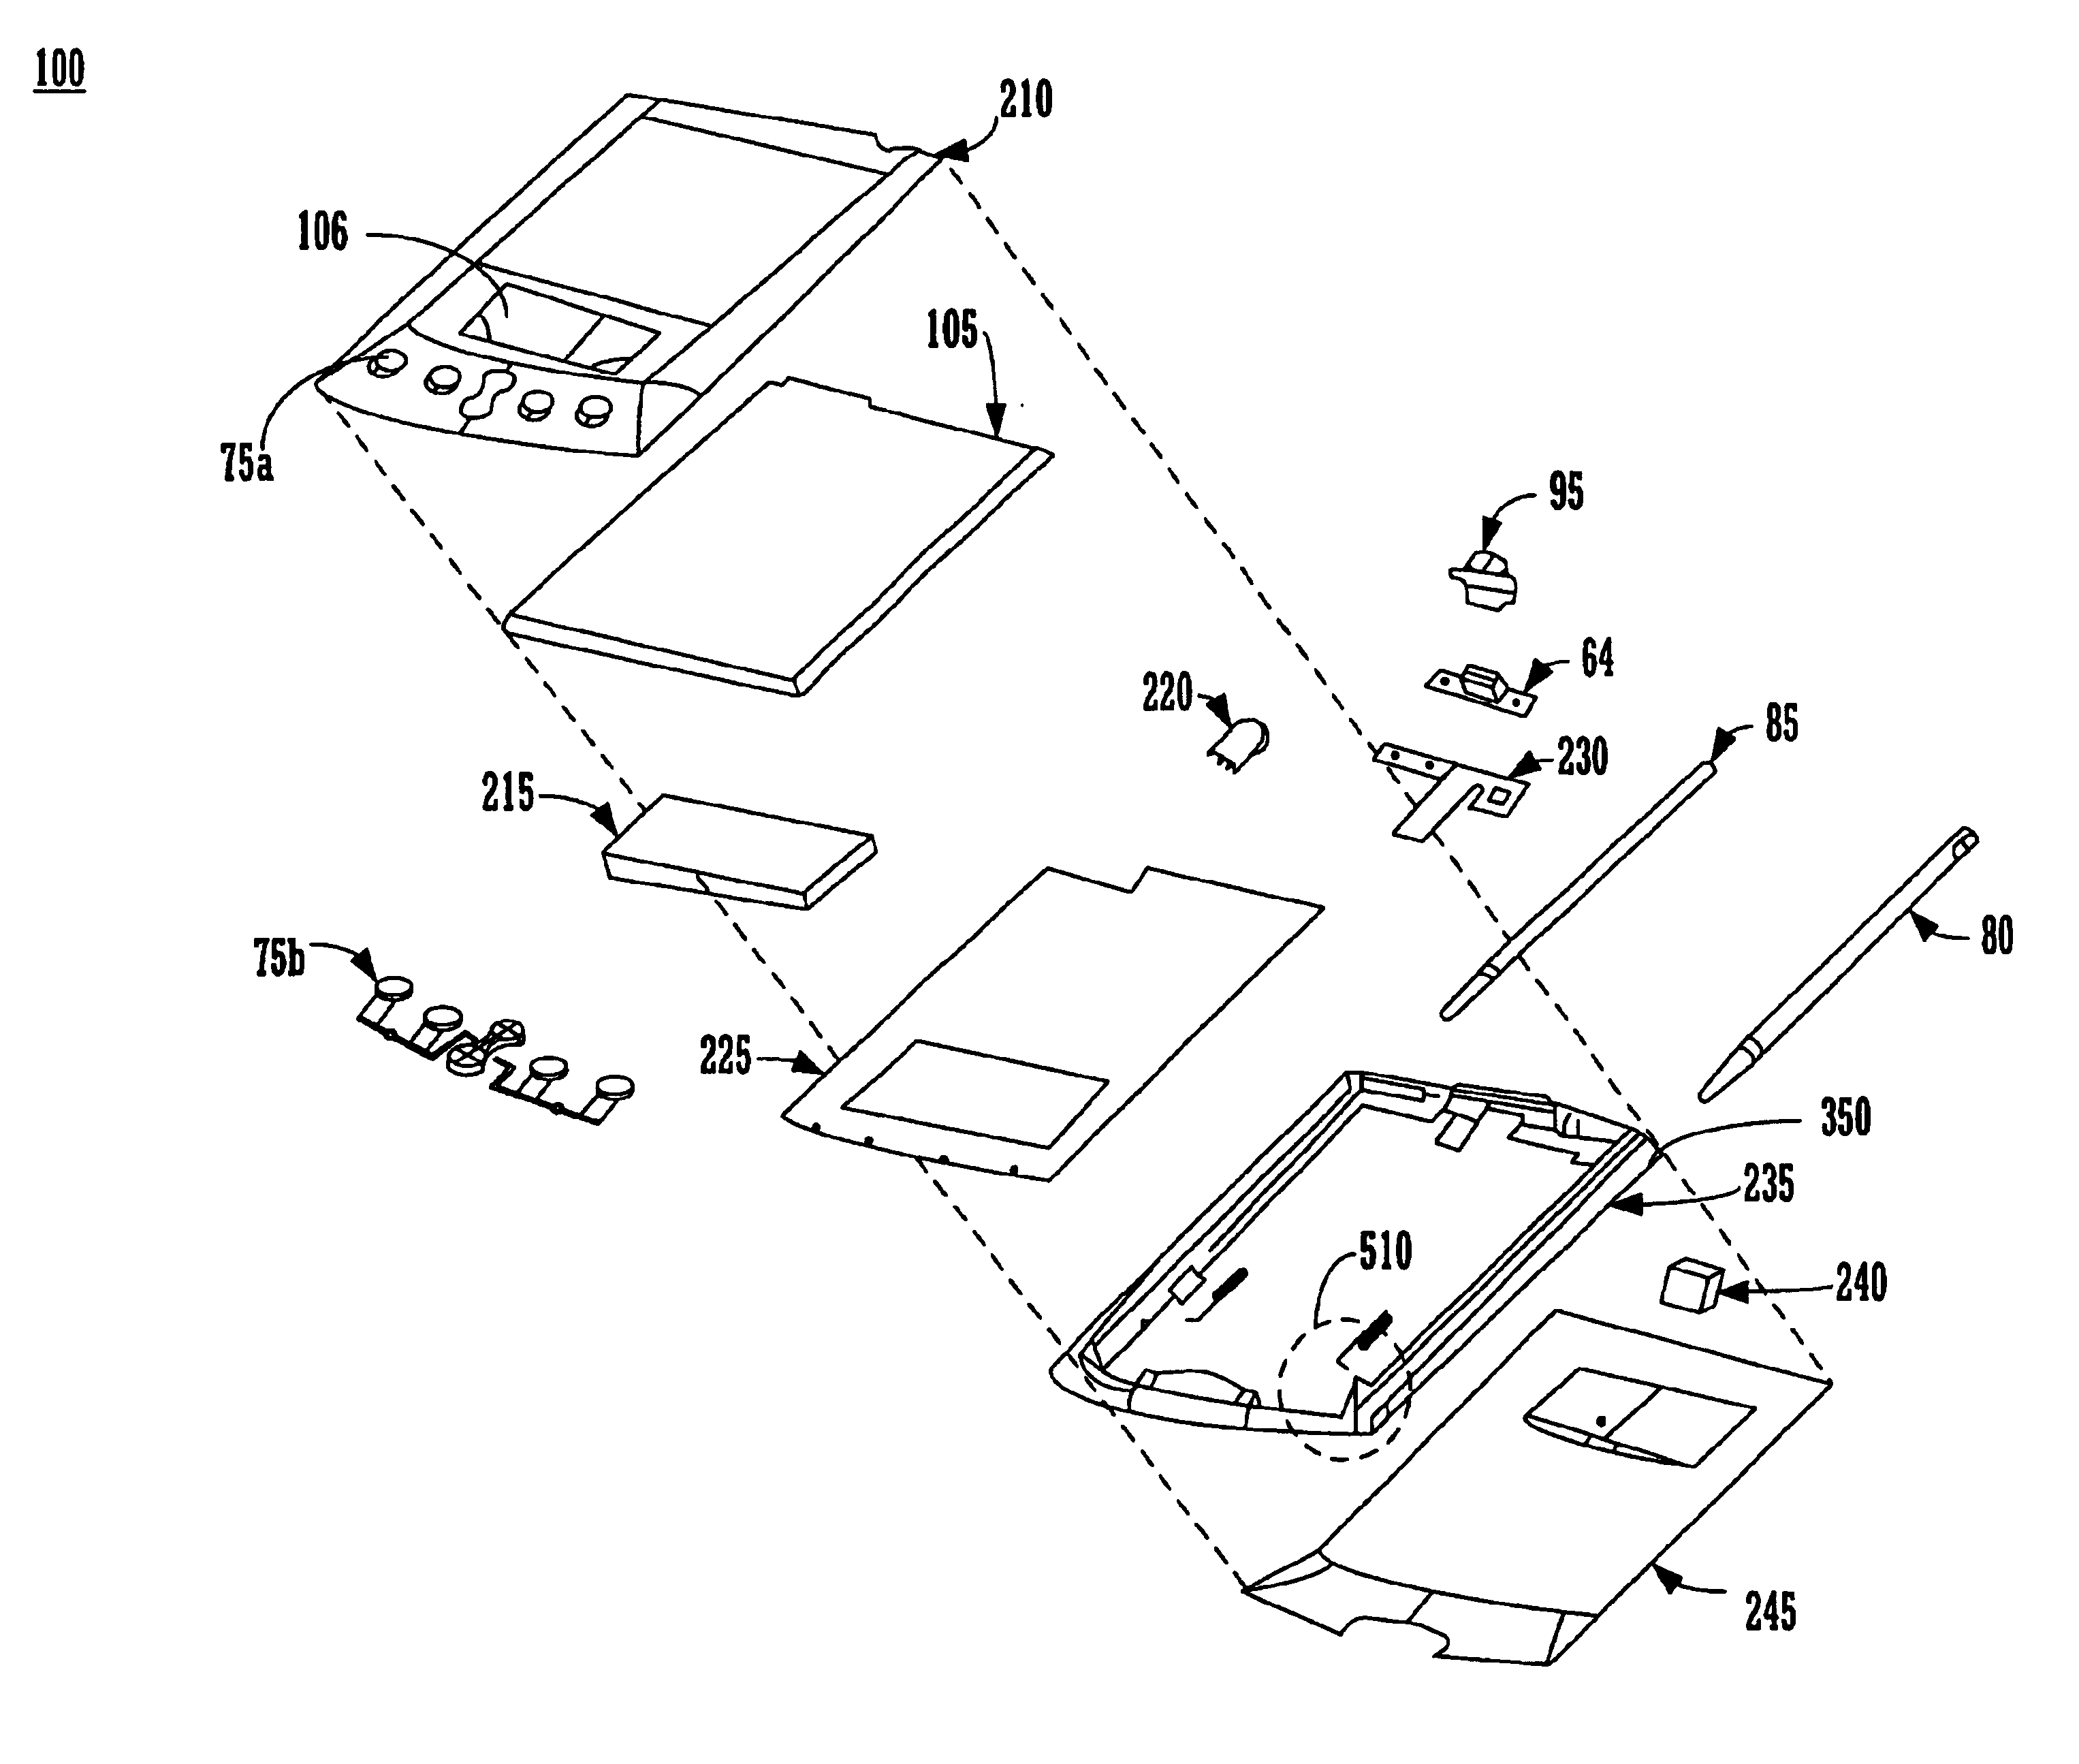 Method and apparatus for automatic power-up and power-down of a computer system based on the positions of an associated stylus and/or hinge